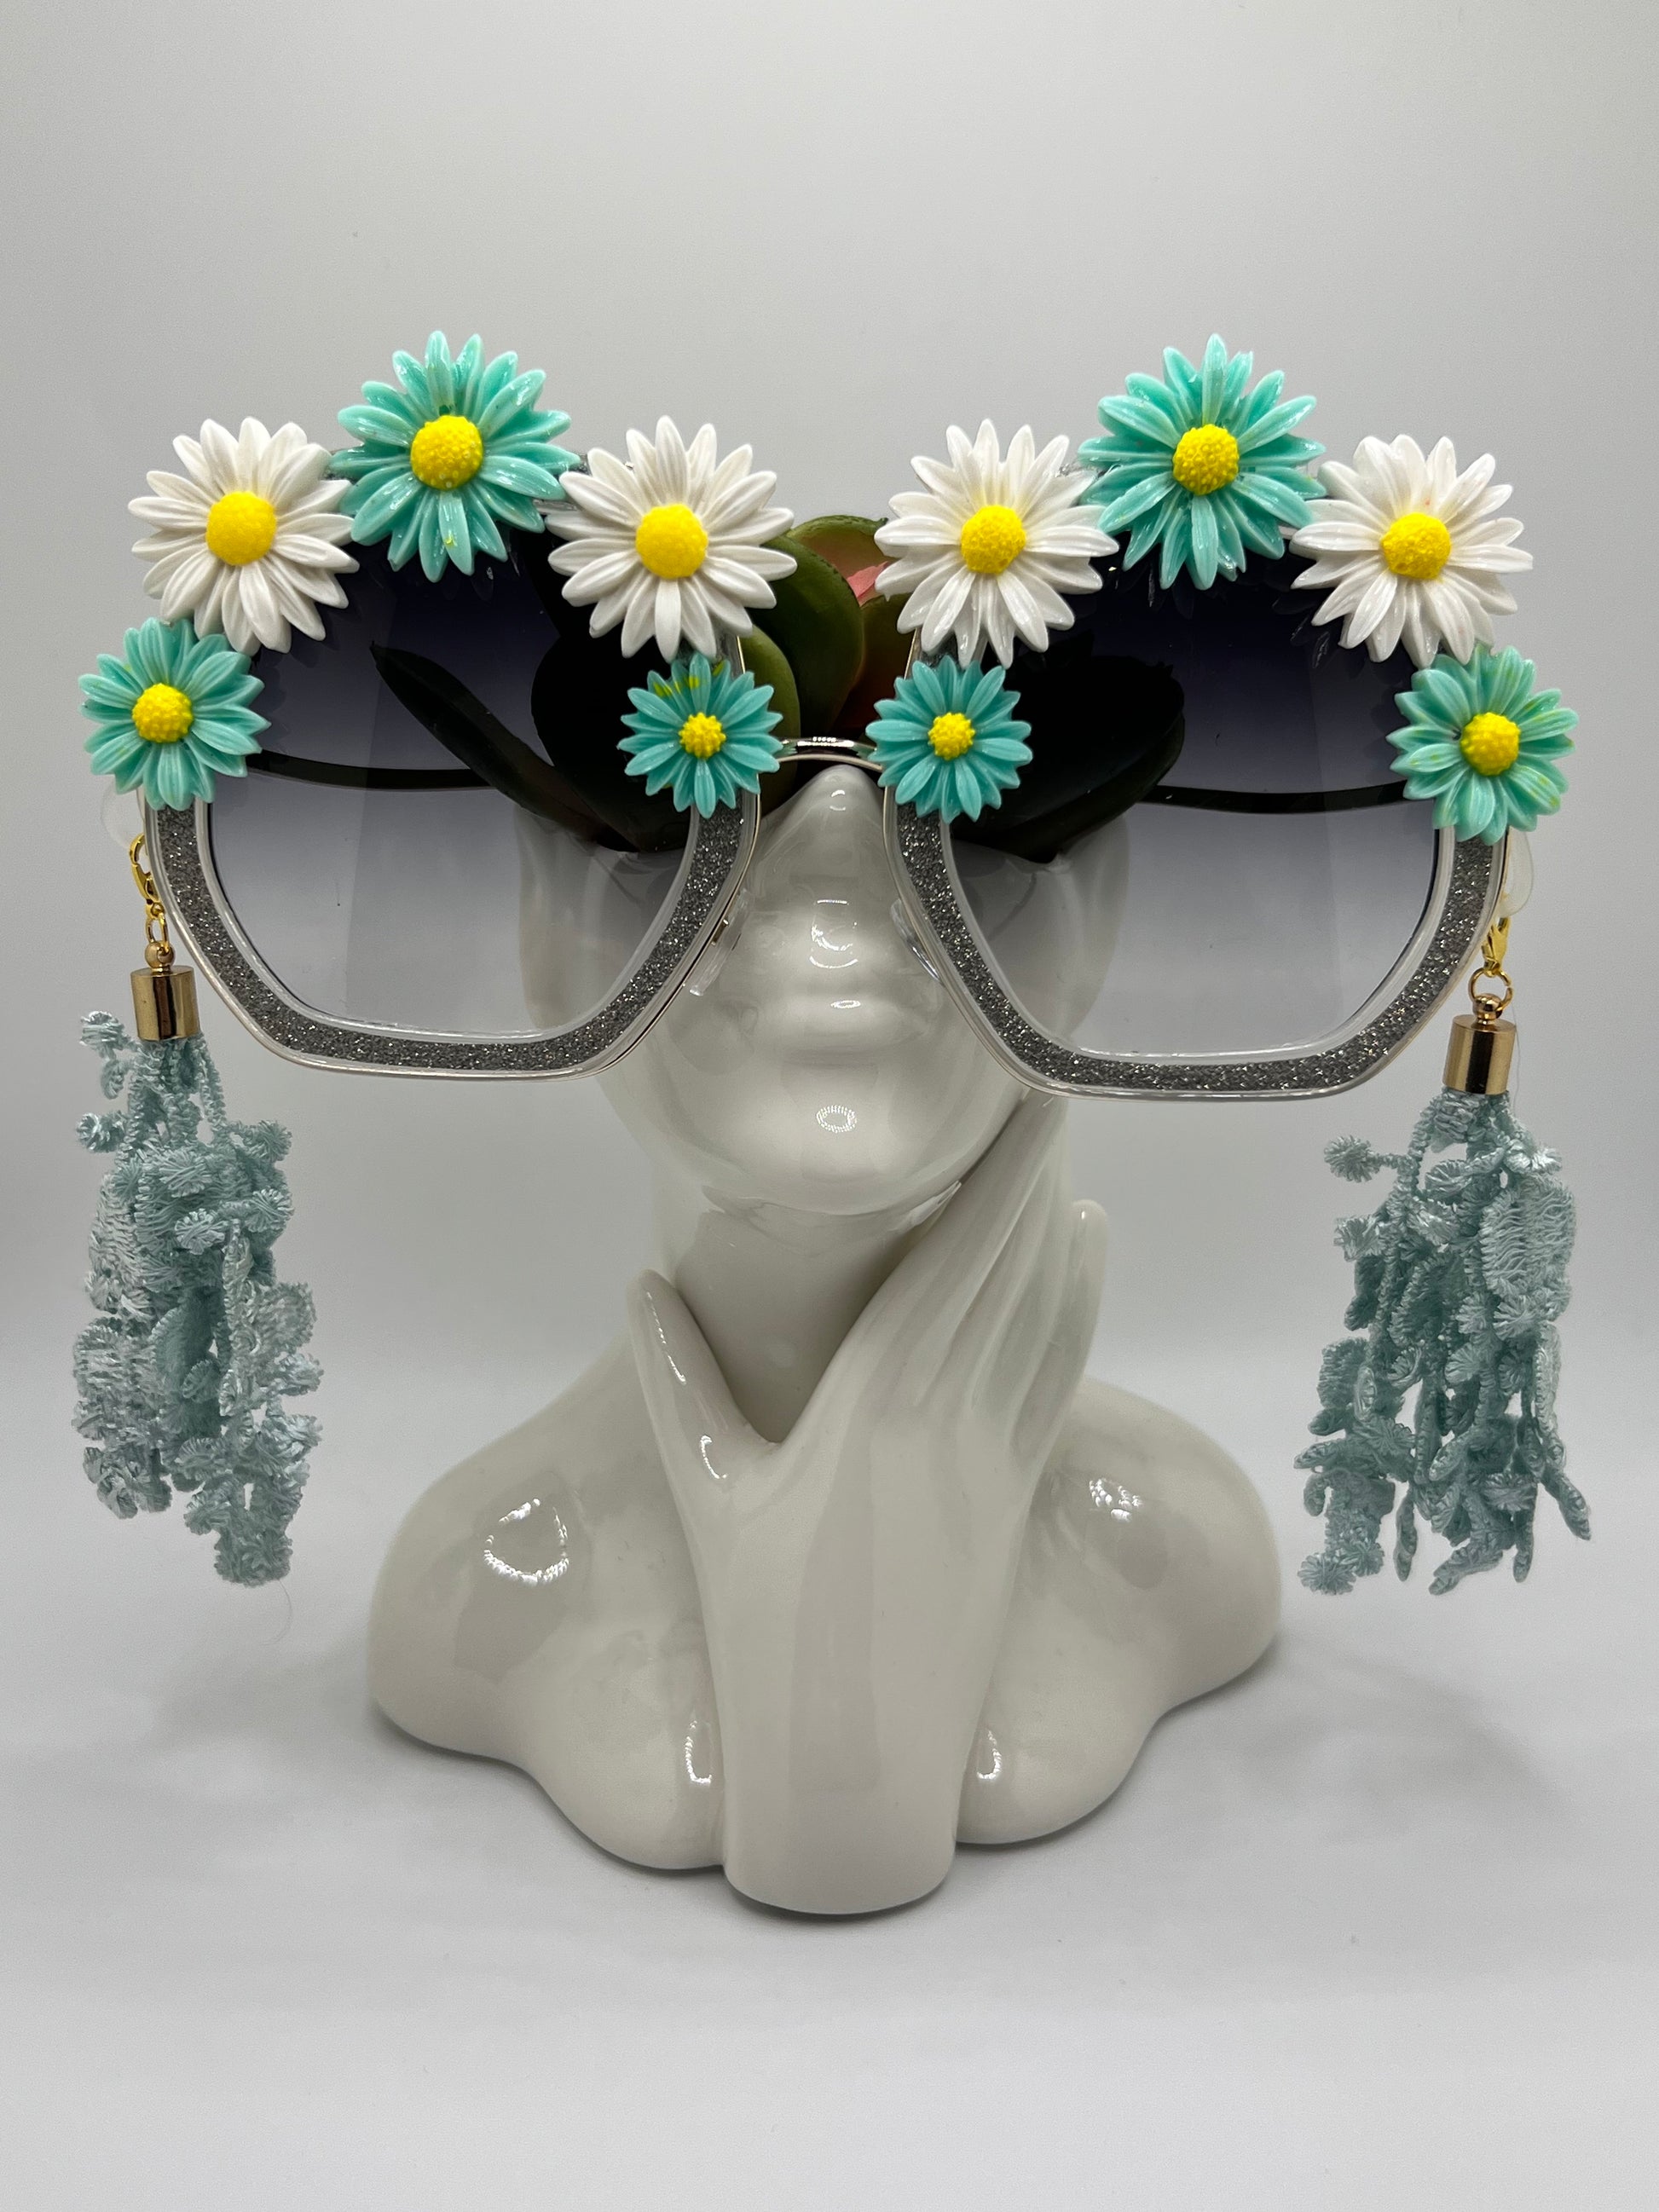 These shimmering silver frames are topped with icey, teal, and white daisies and come with removable lace tassels and a gold eyewear chain.